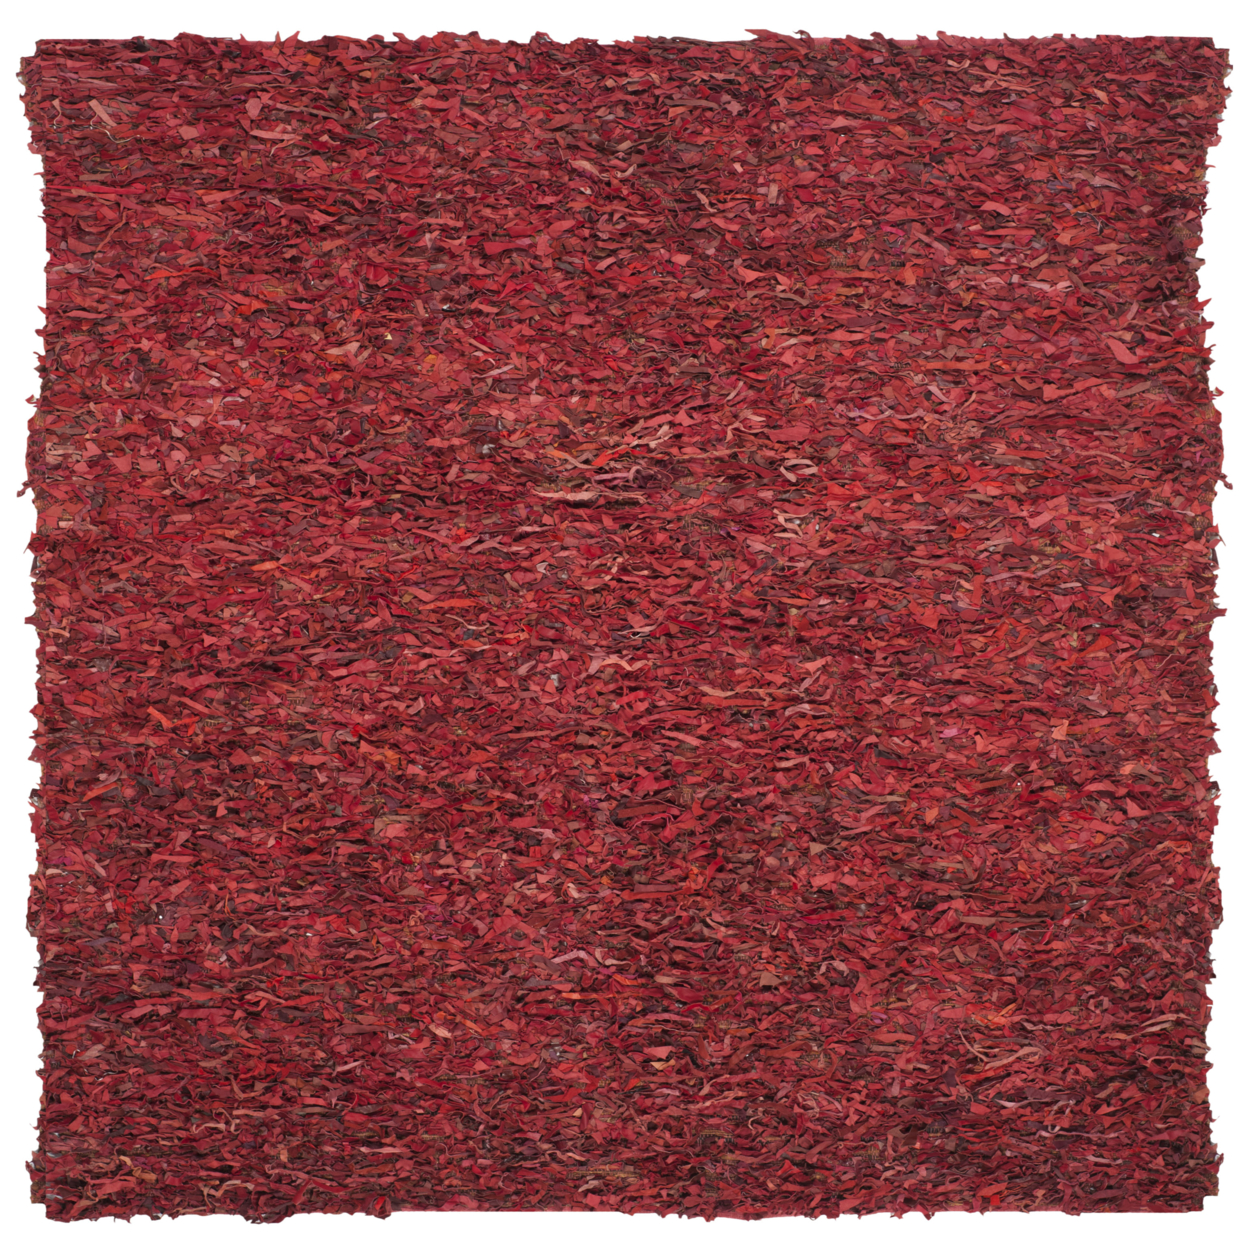 SAFAVIEH Leather Shag LSG511D Hand-knotted Red Rug - 6' Square